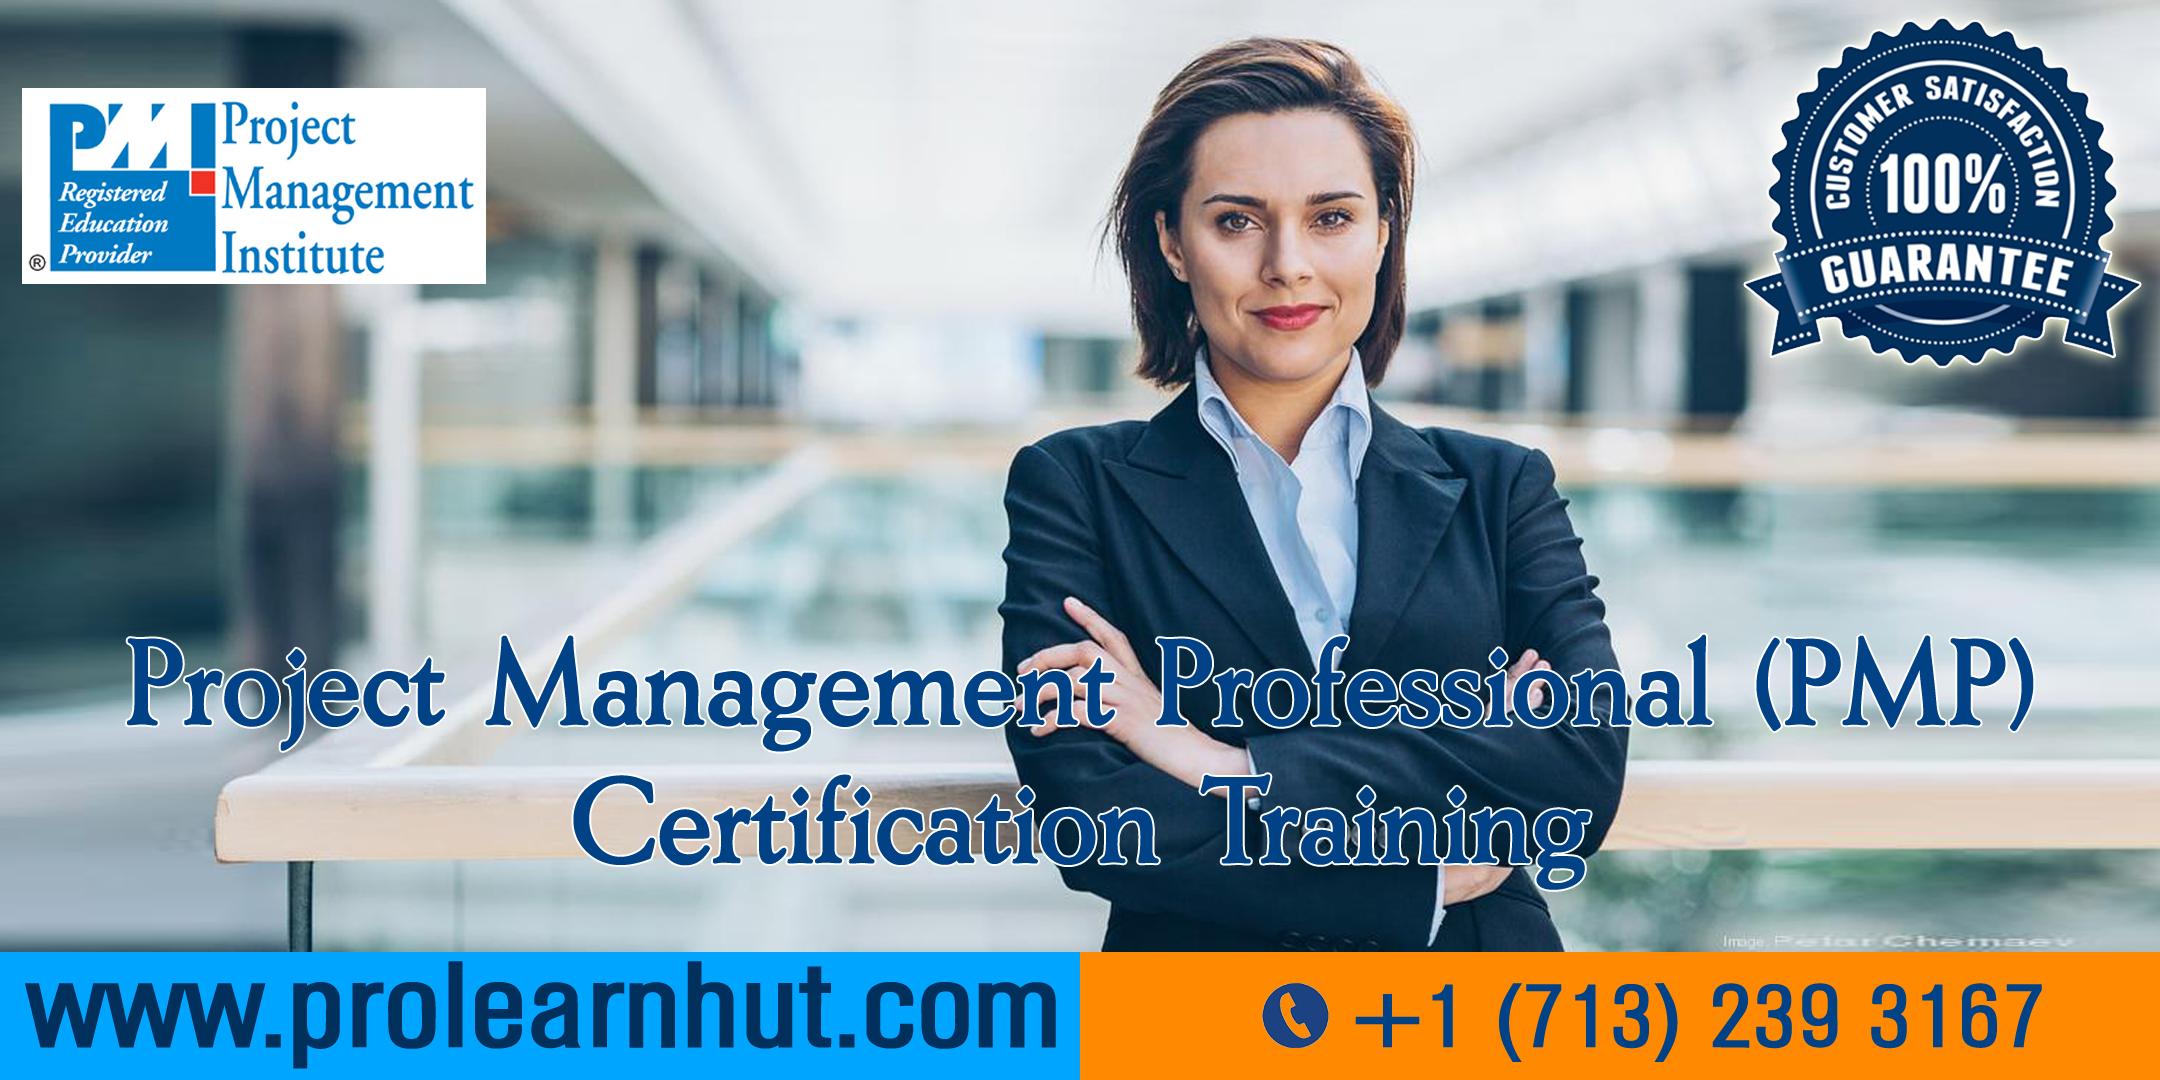 PMP Certification | Project Management Certification| PMP Training in Carlsbad, CA | ProLearnHut